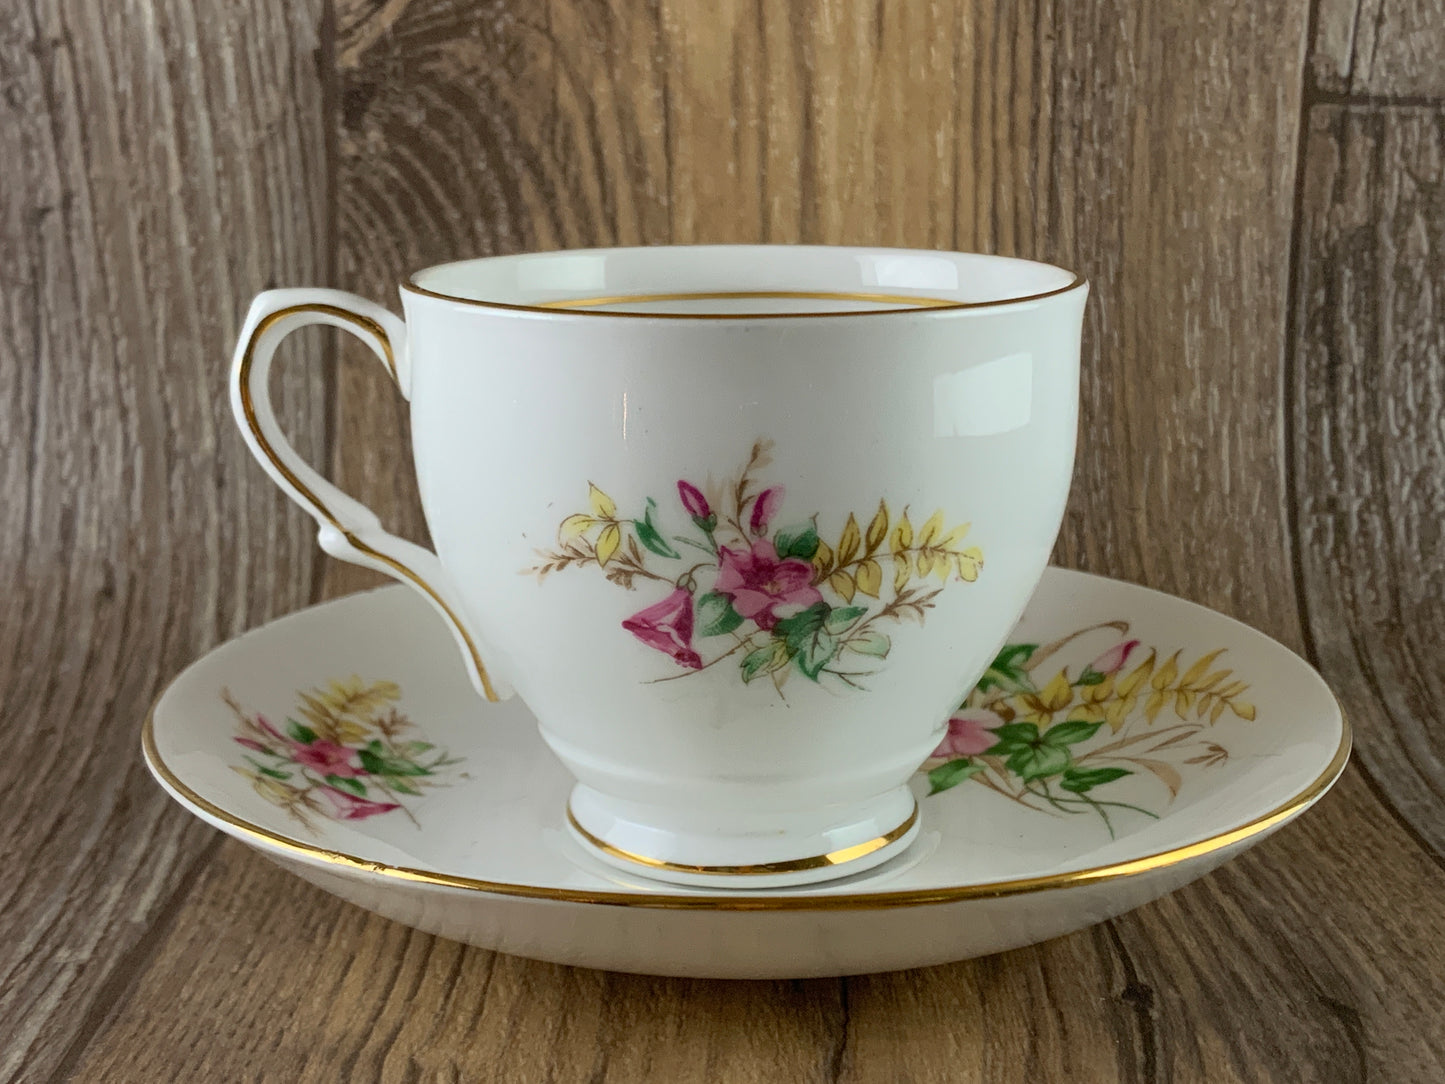 Vintage Teacup with Pink Trumpet Flowers Clare China Pink Floral Tea Cup